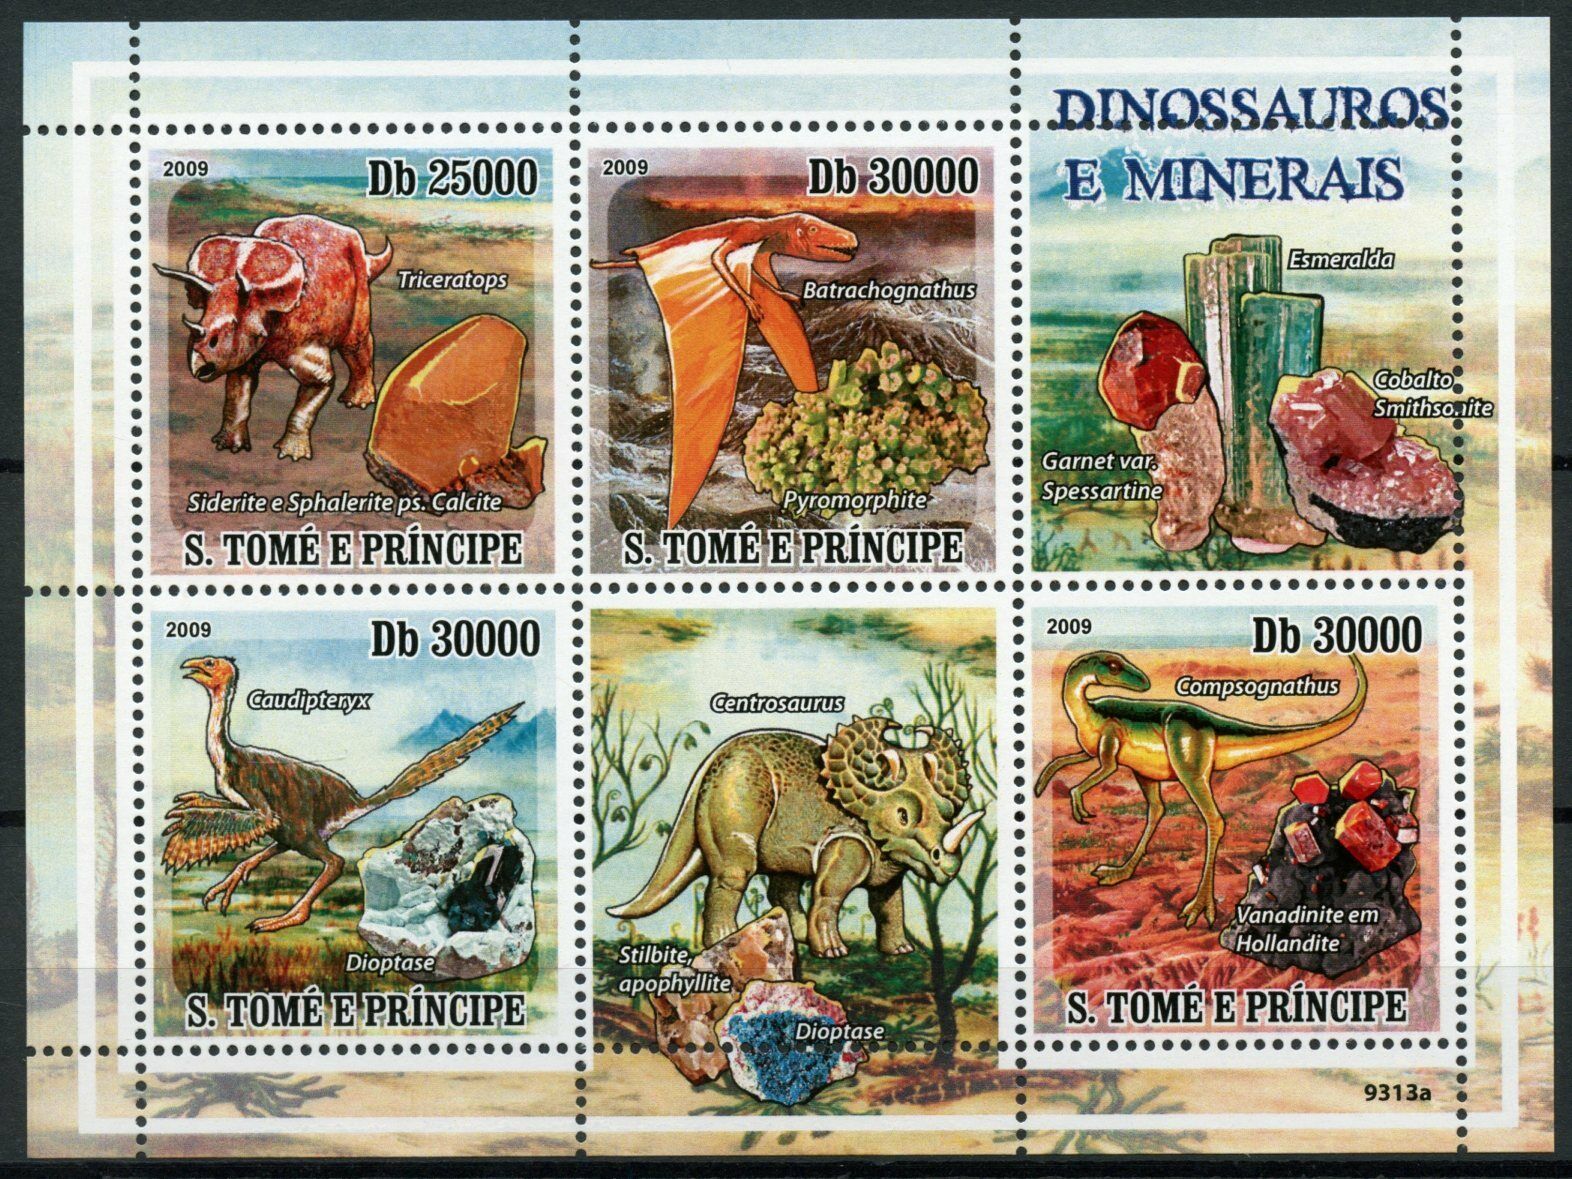 Sao Tome & Principe Dinosaurs & Minerals Stamps 2009 MNH Triceratops 4v M/S